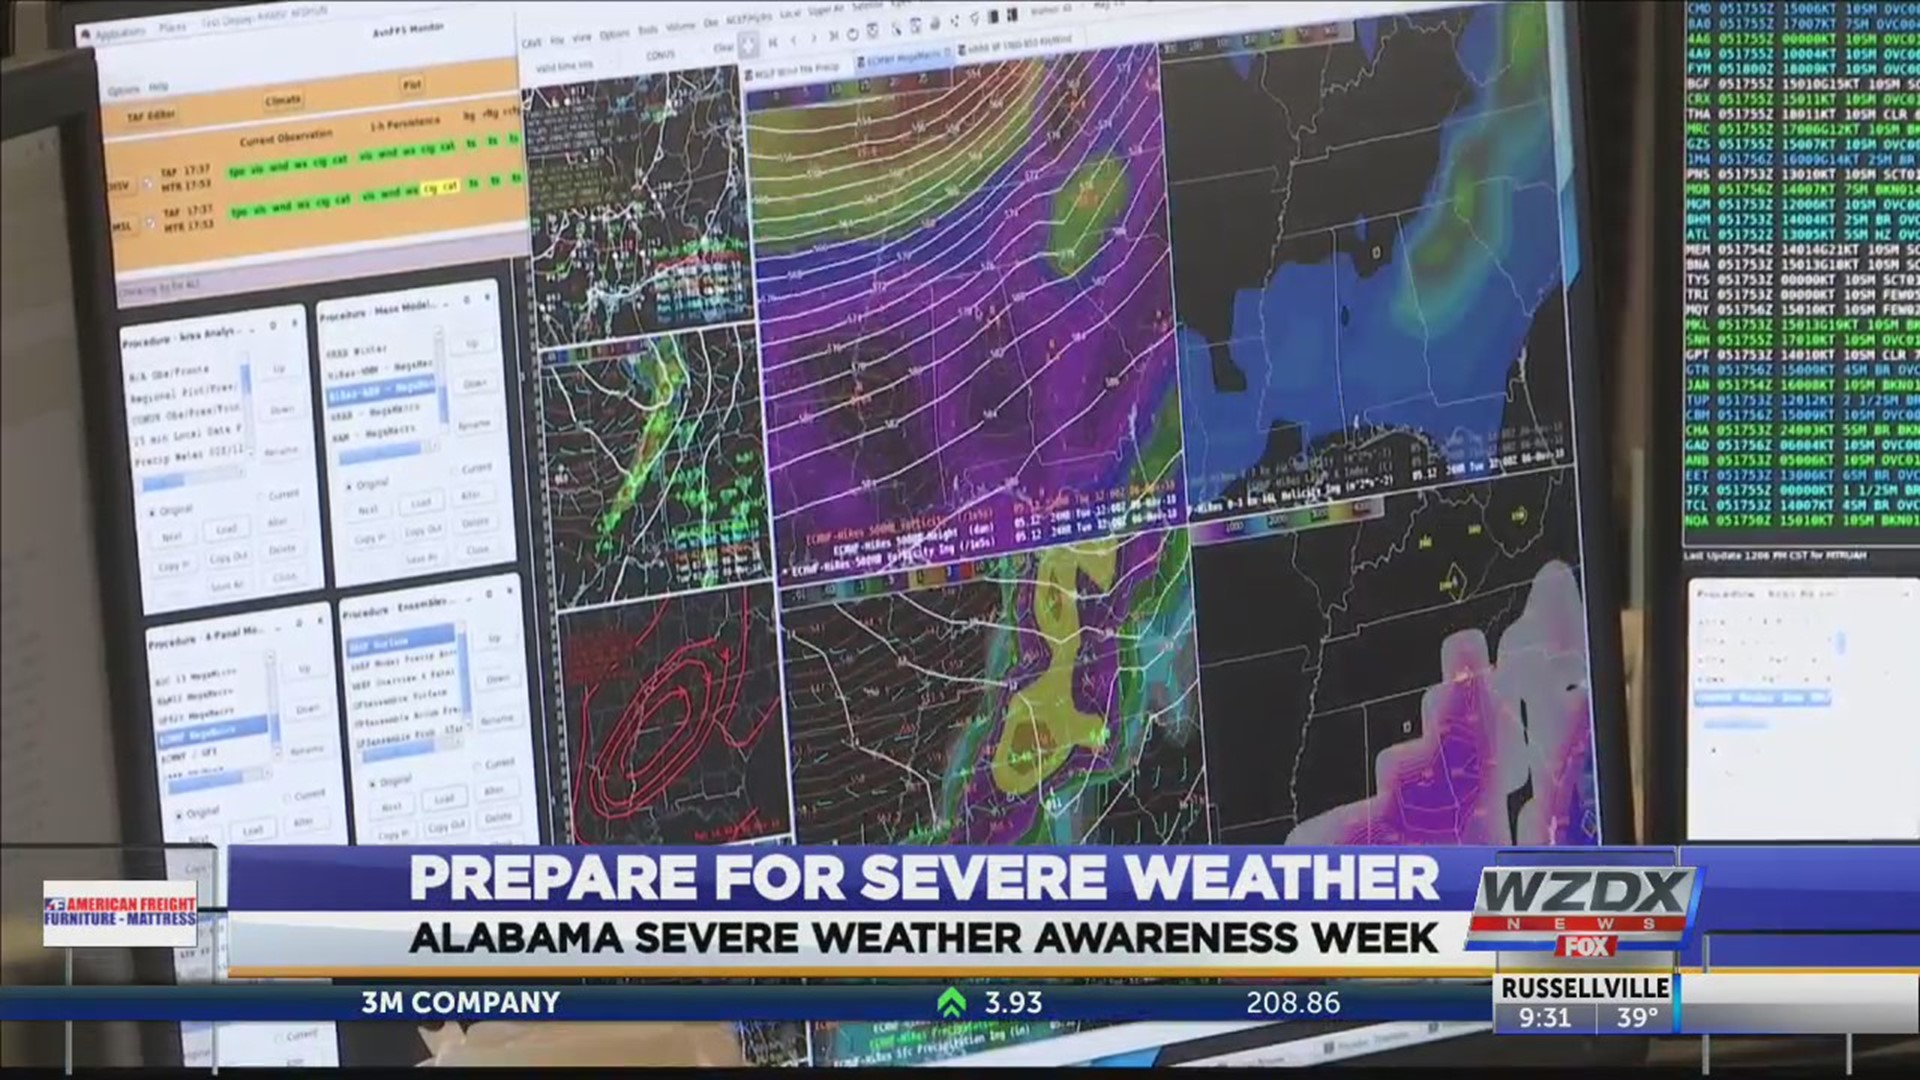 It's Severe Weather Awareness Week - here's what you need to know to prepare.